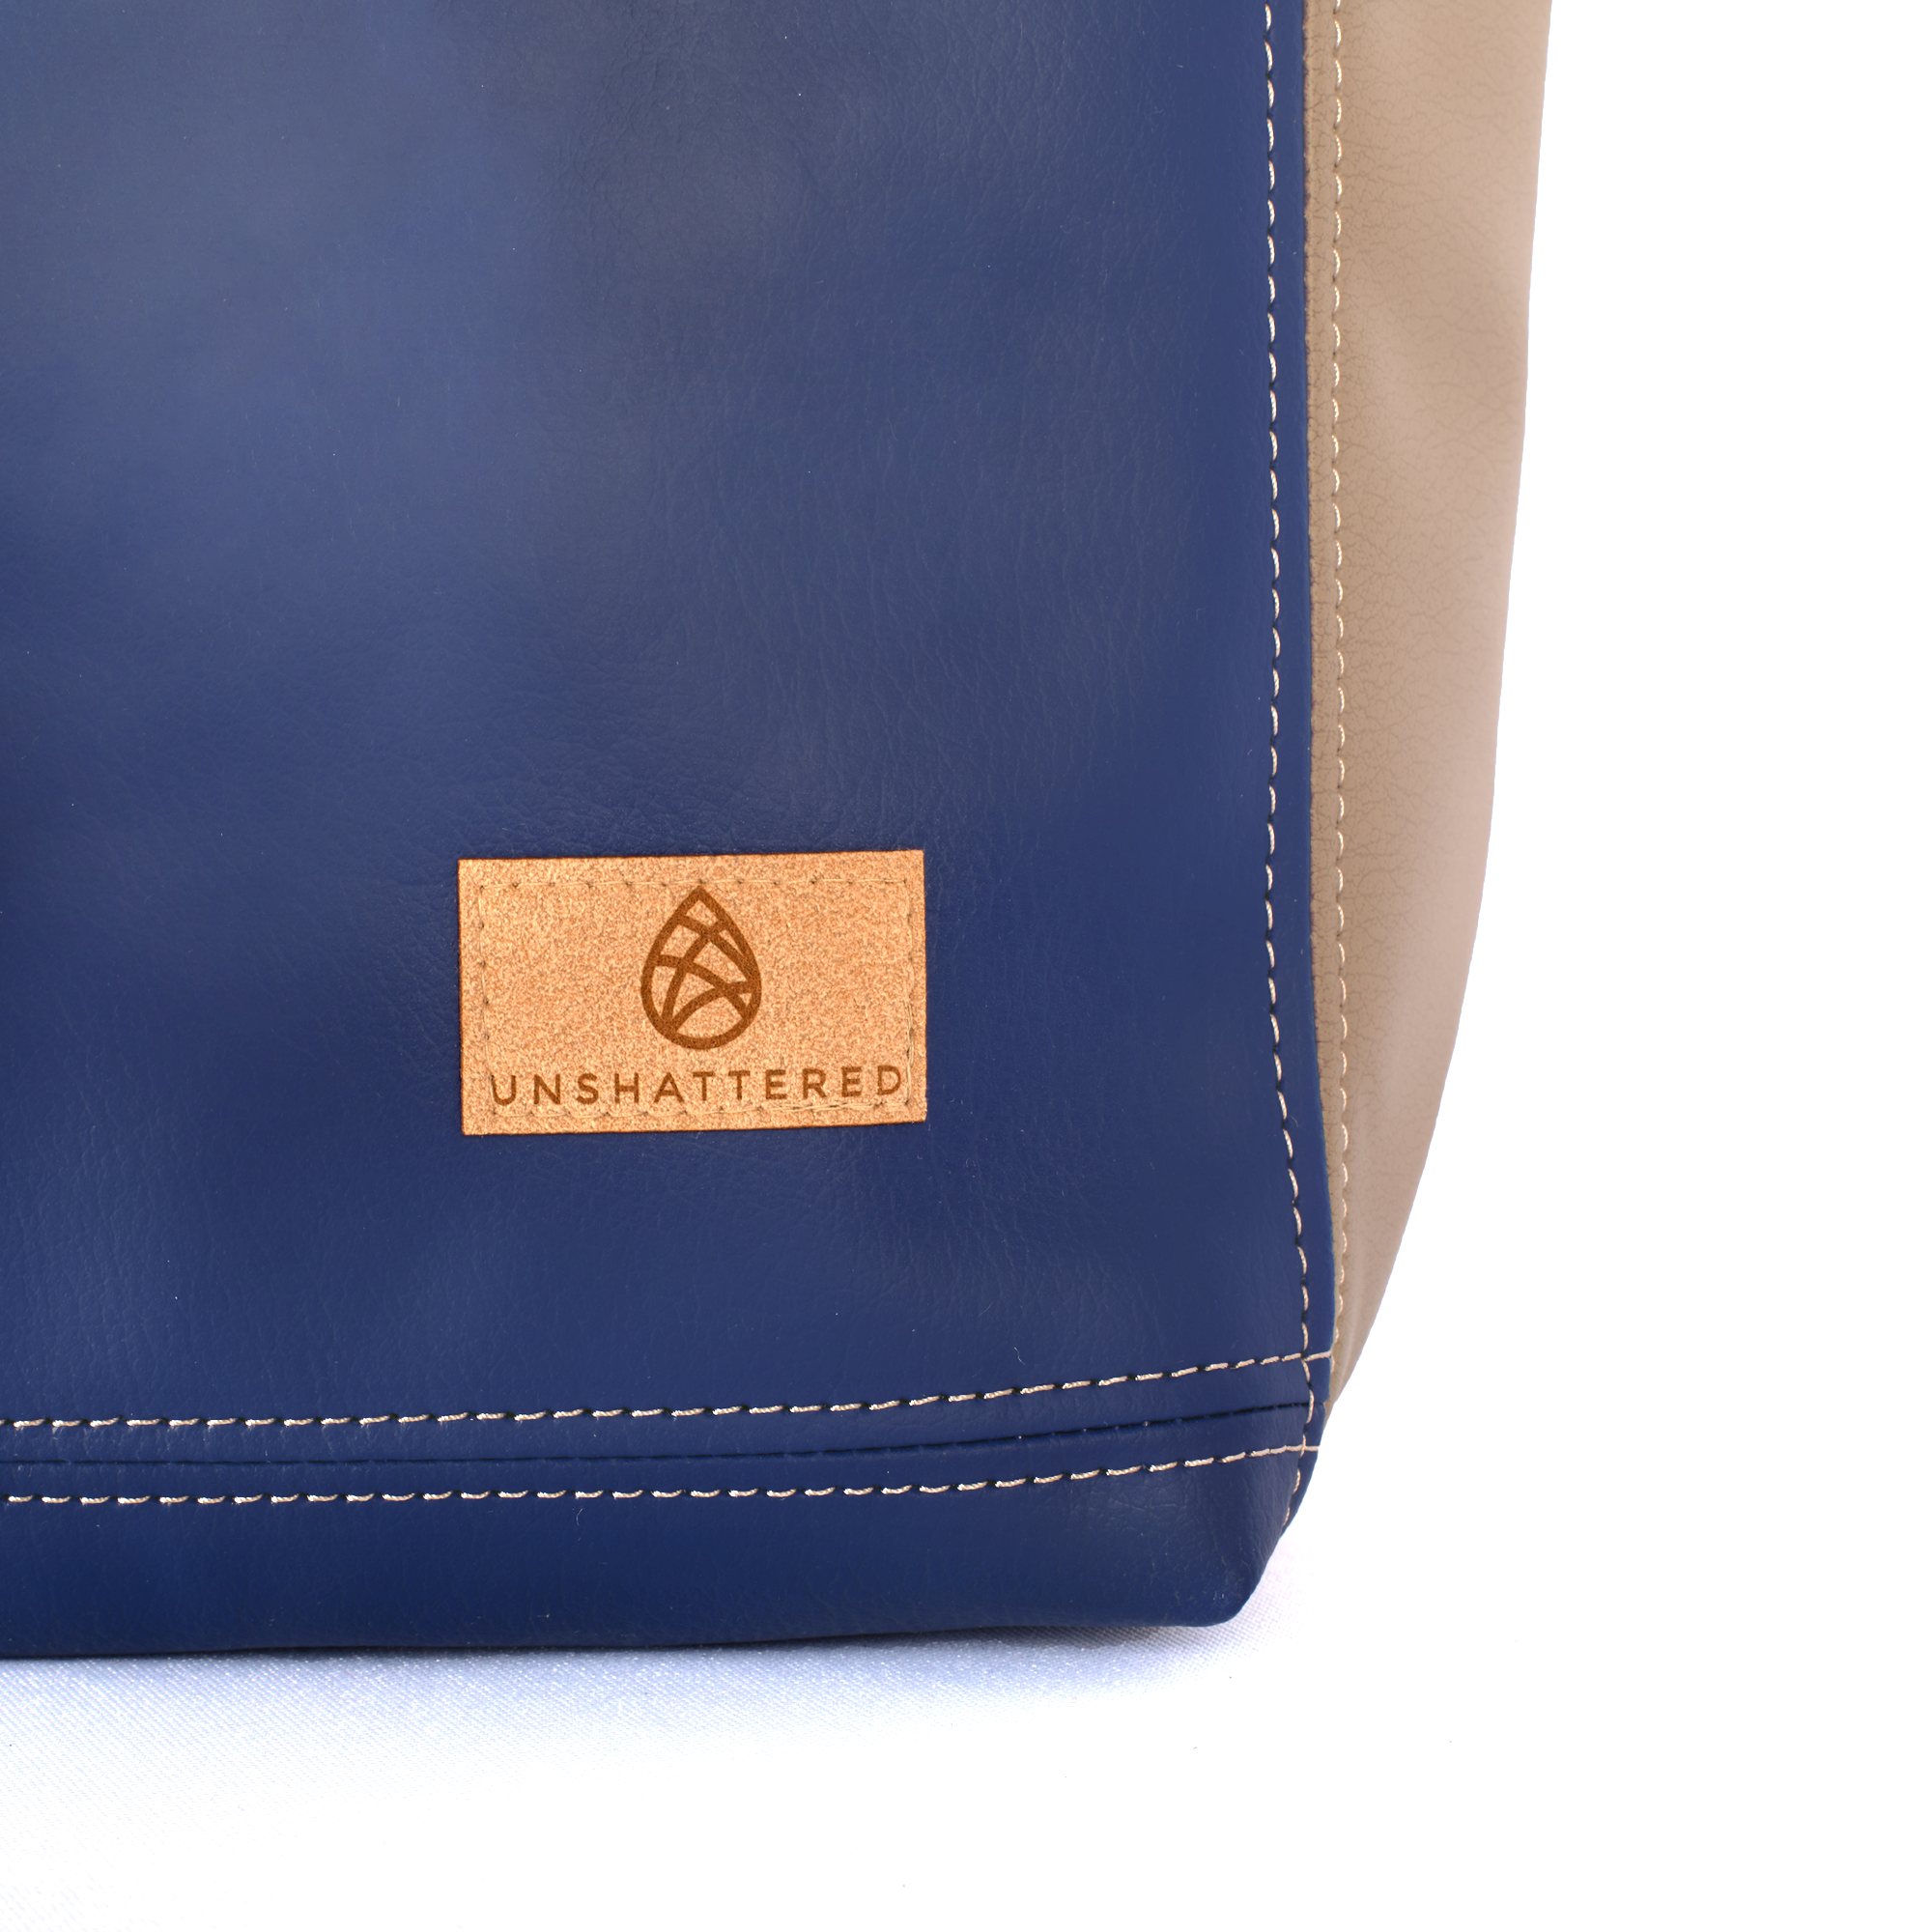 Tote from Southwest Airlines Leather